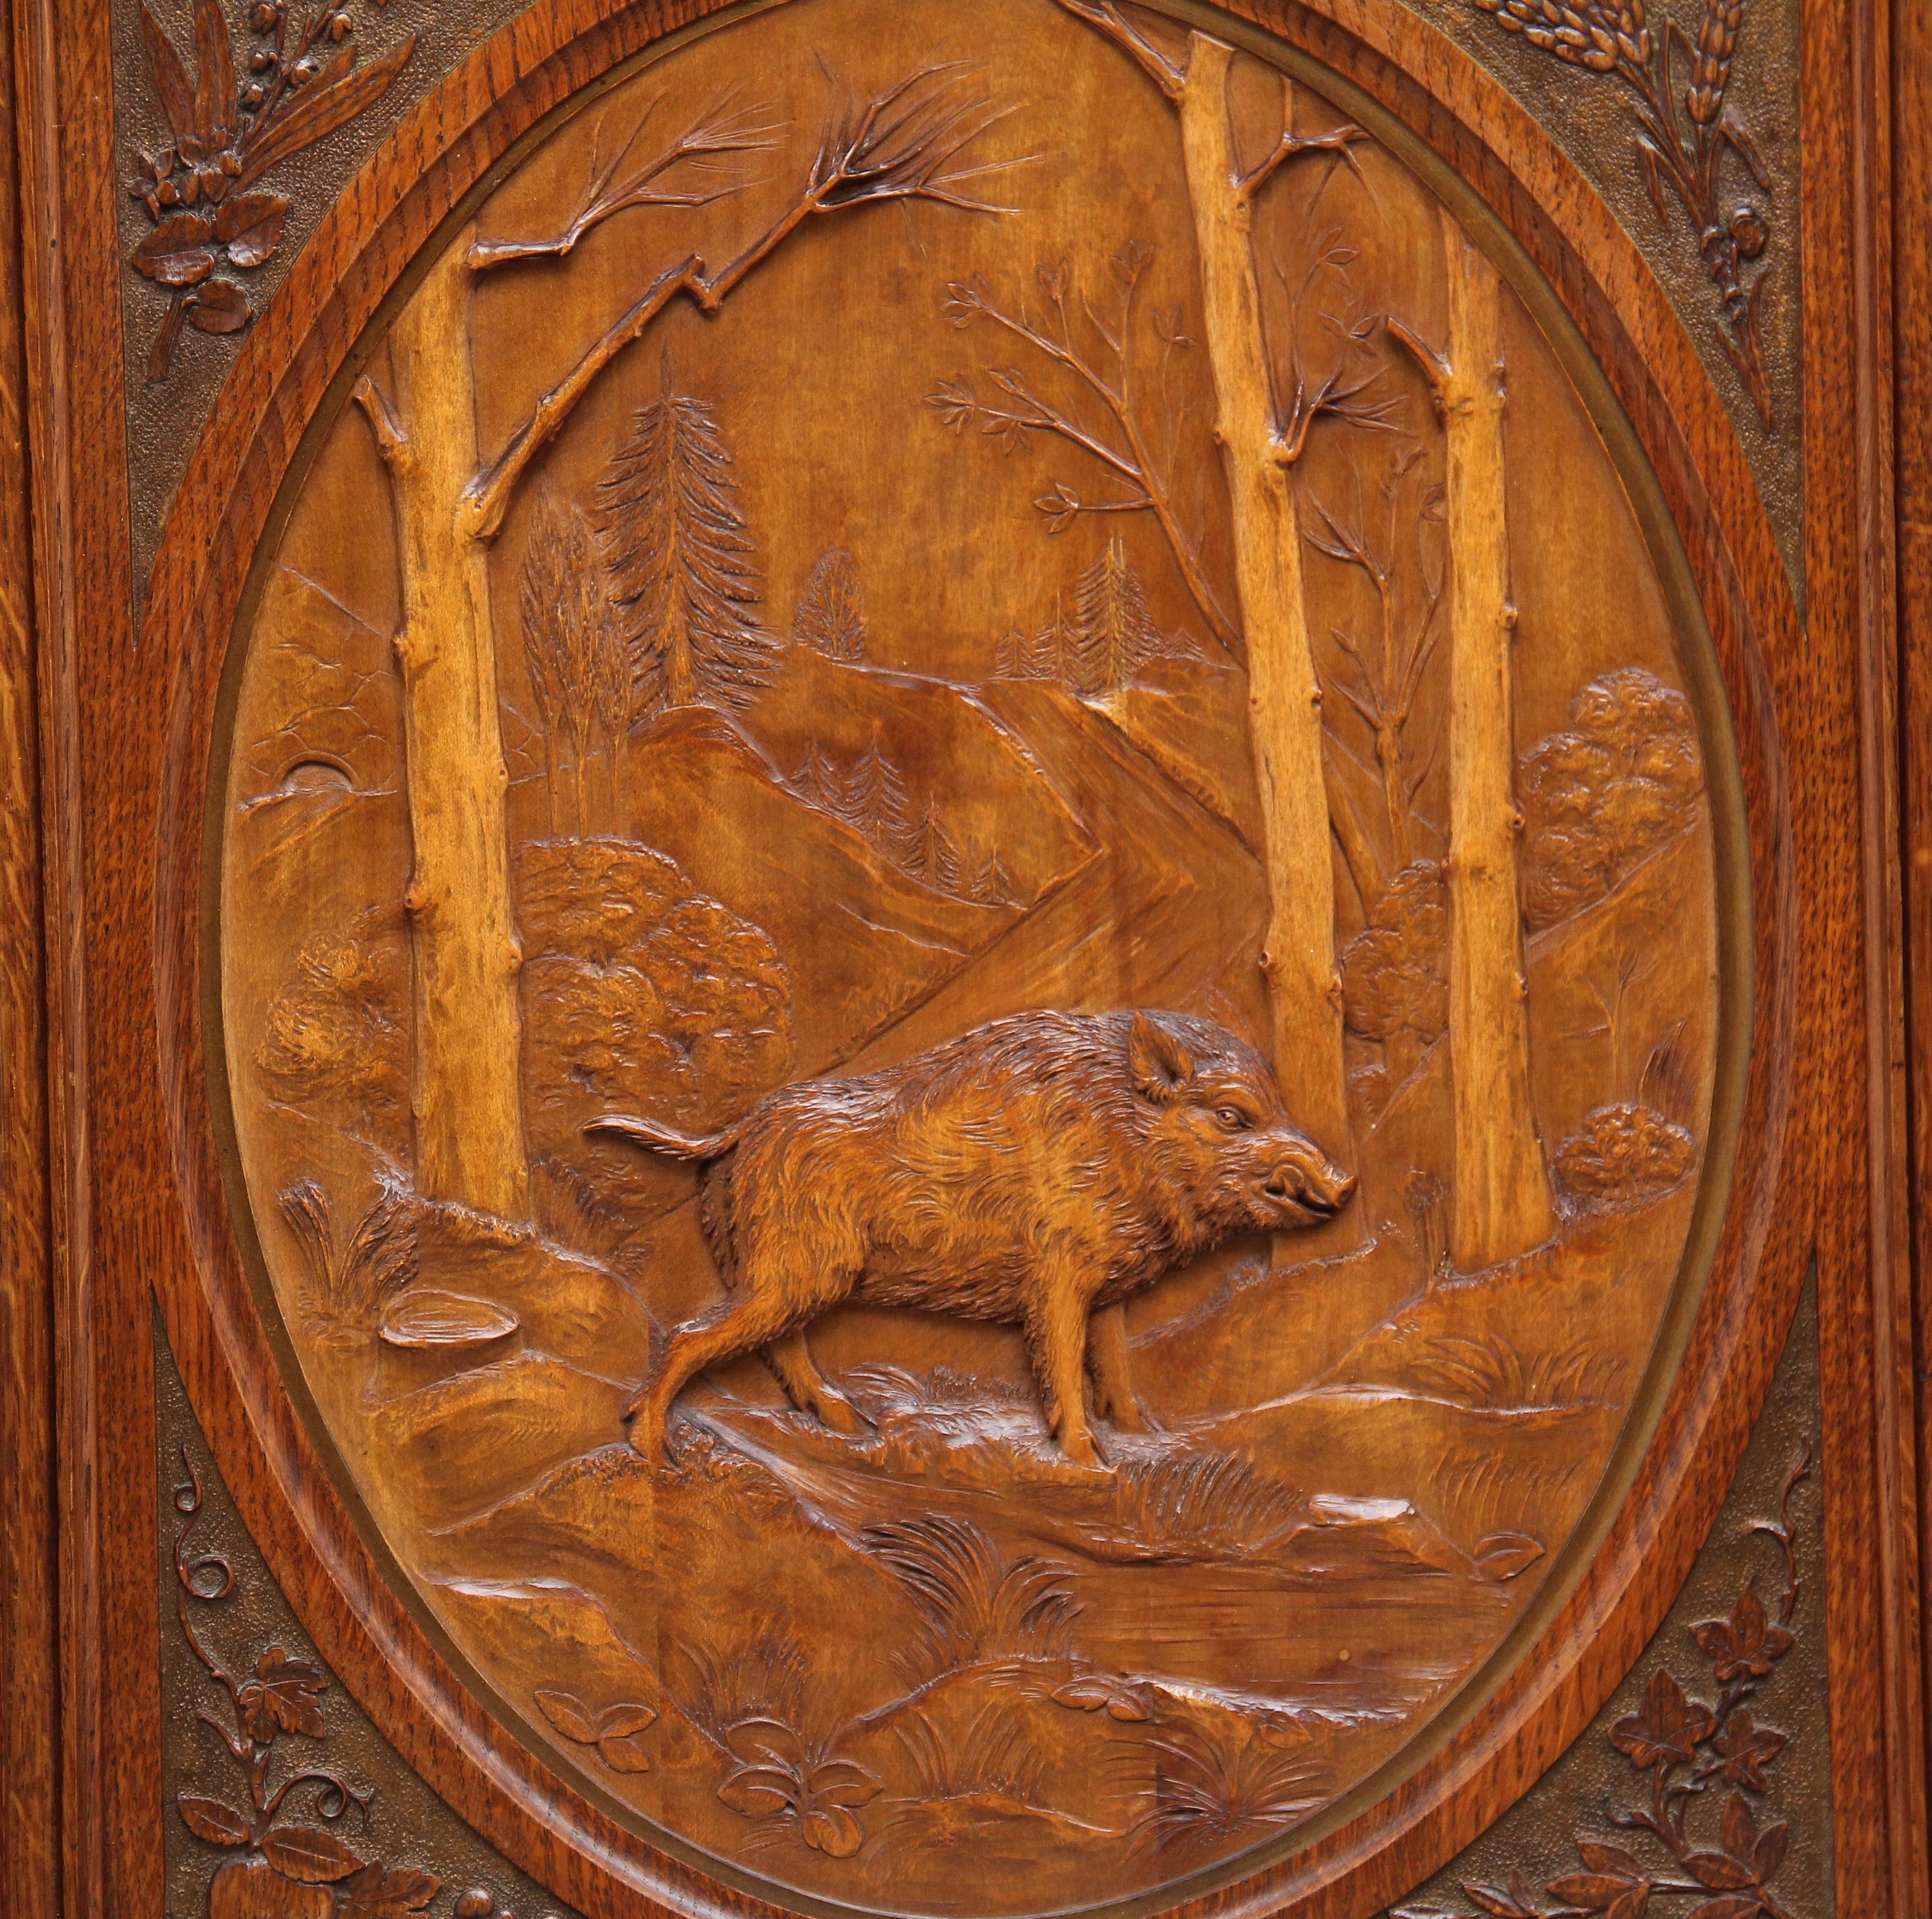 Early 20th century Swiss carved oak panel of a wild boar in a wooded mountainous landscape in a carved oak frame. Signed on the back A.D. Sludt 1902.
 